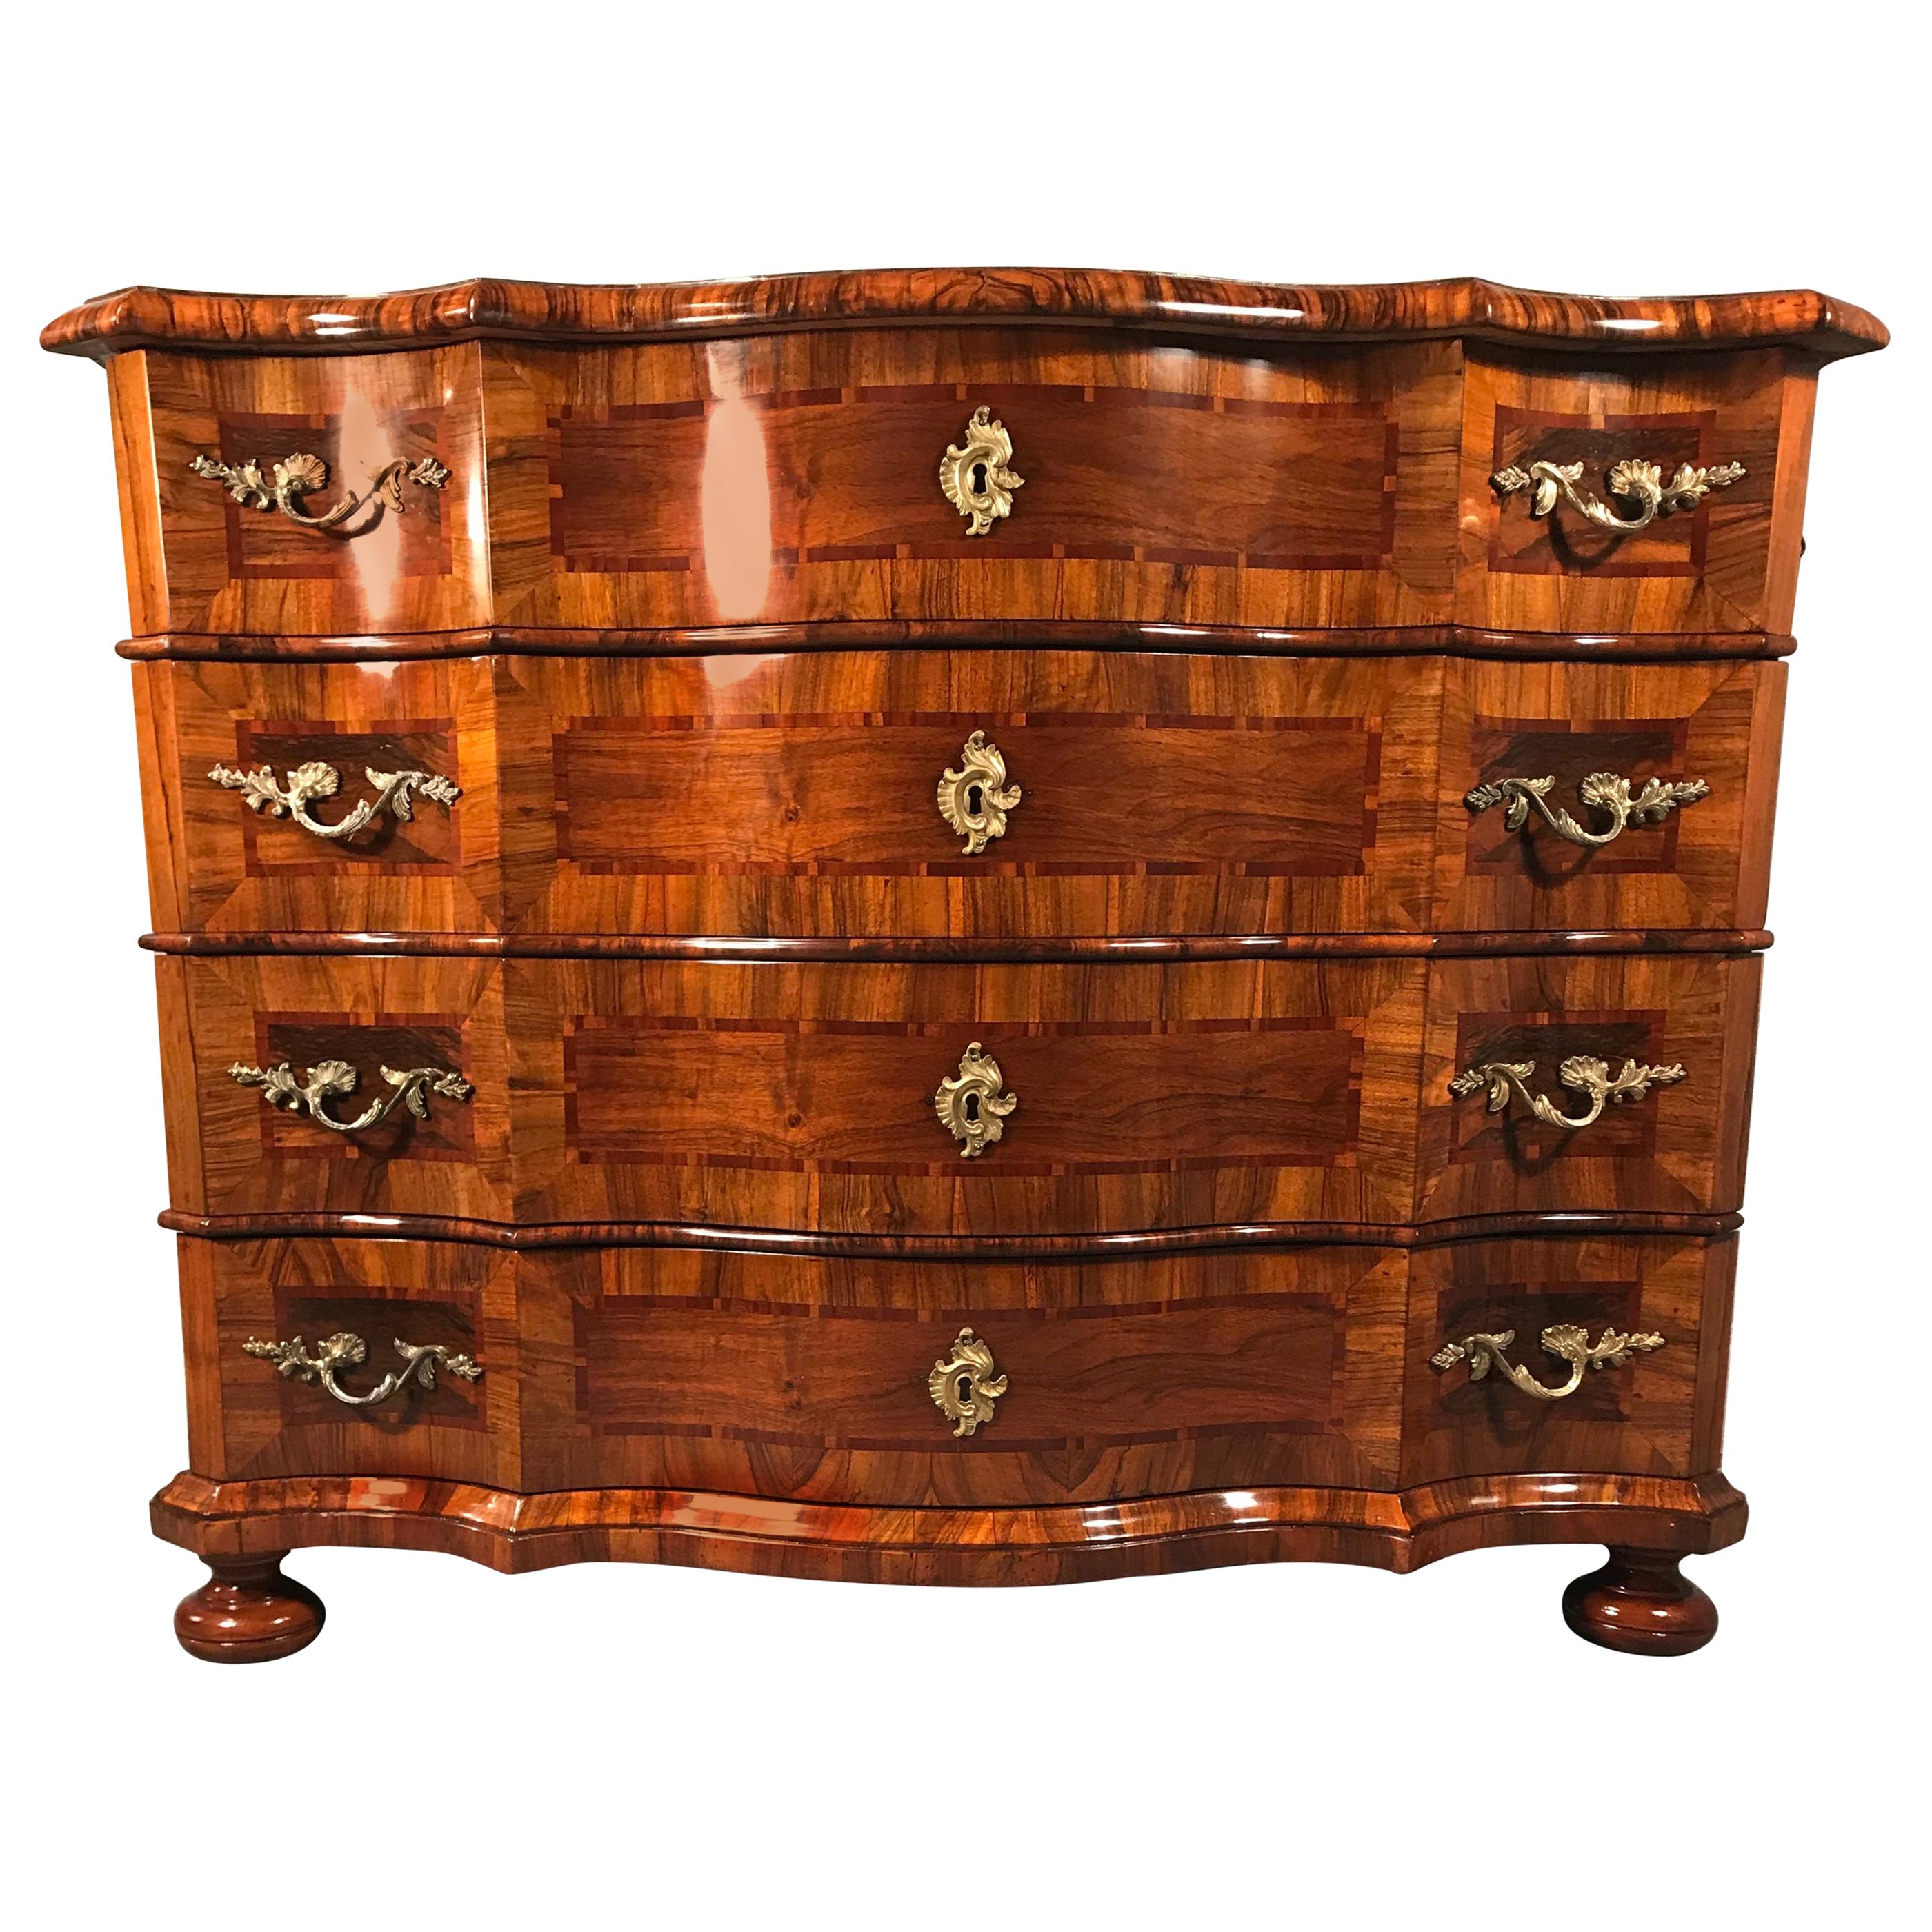 Baroque Commode, Würzburg 'Germany', 1750